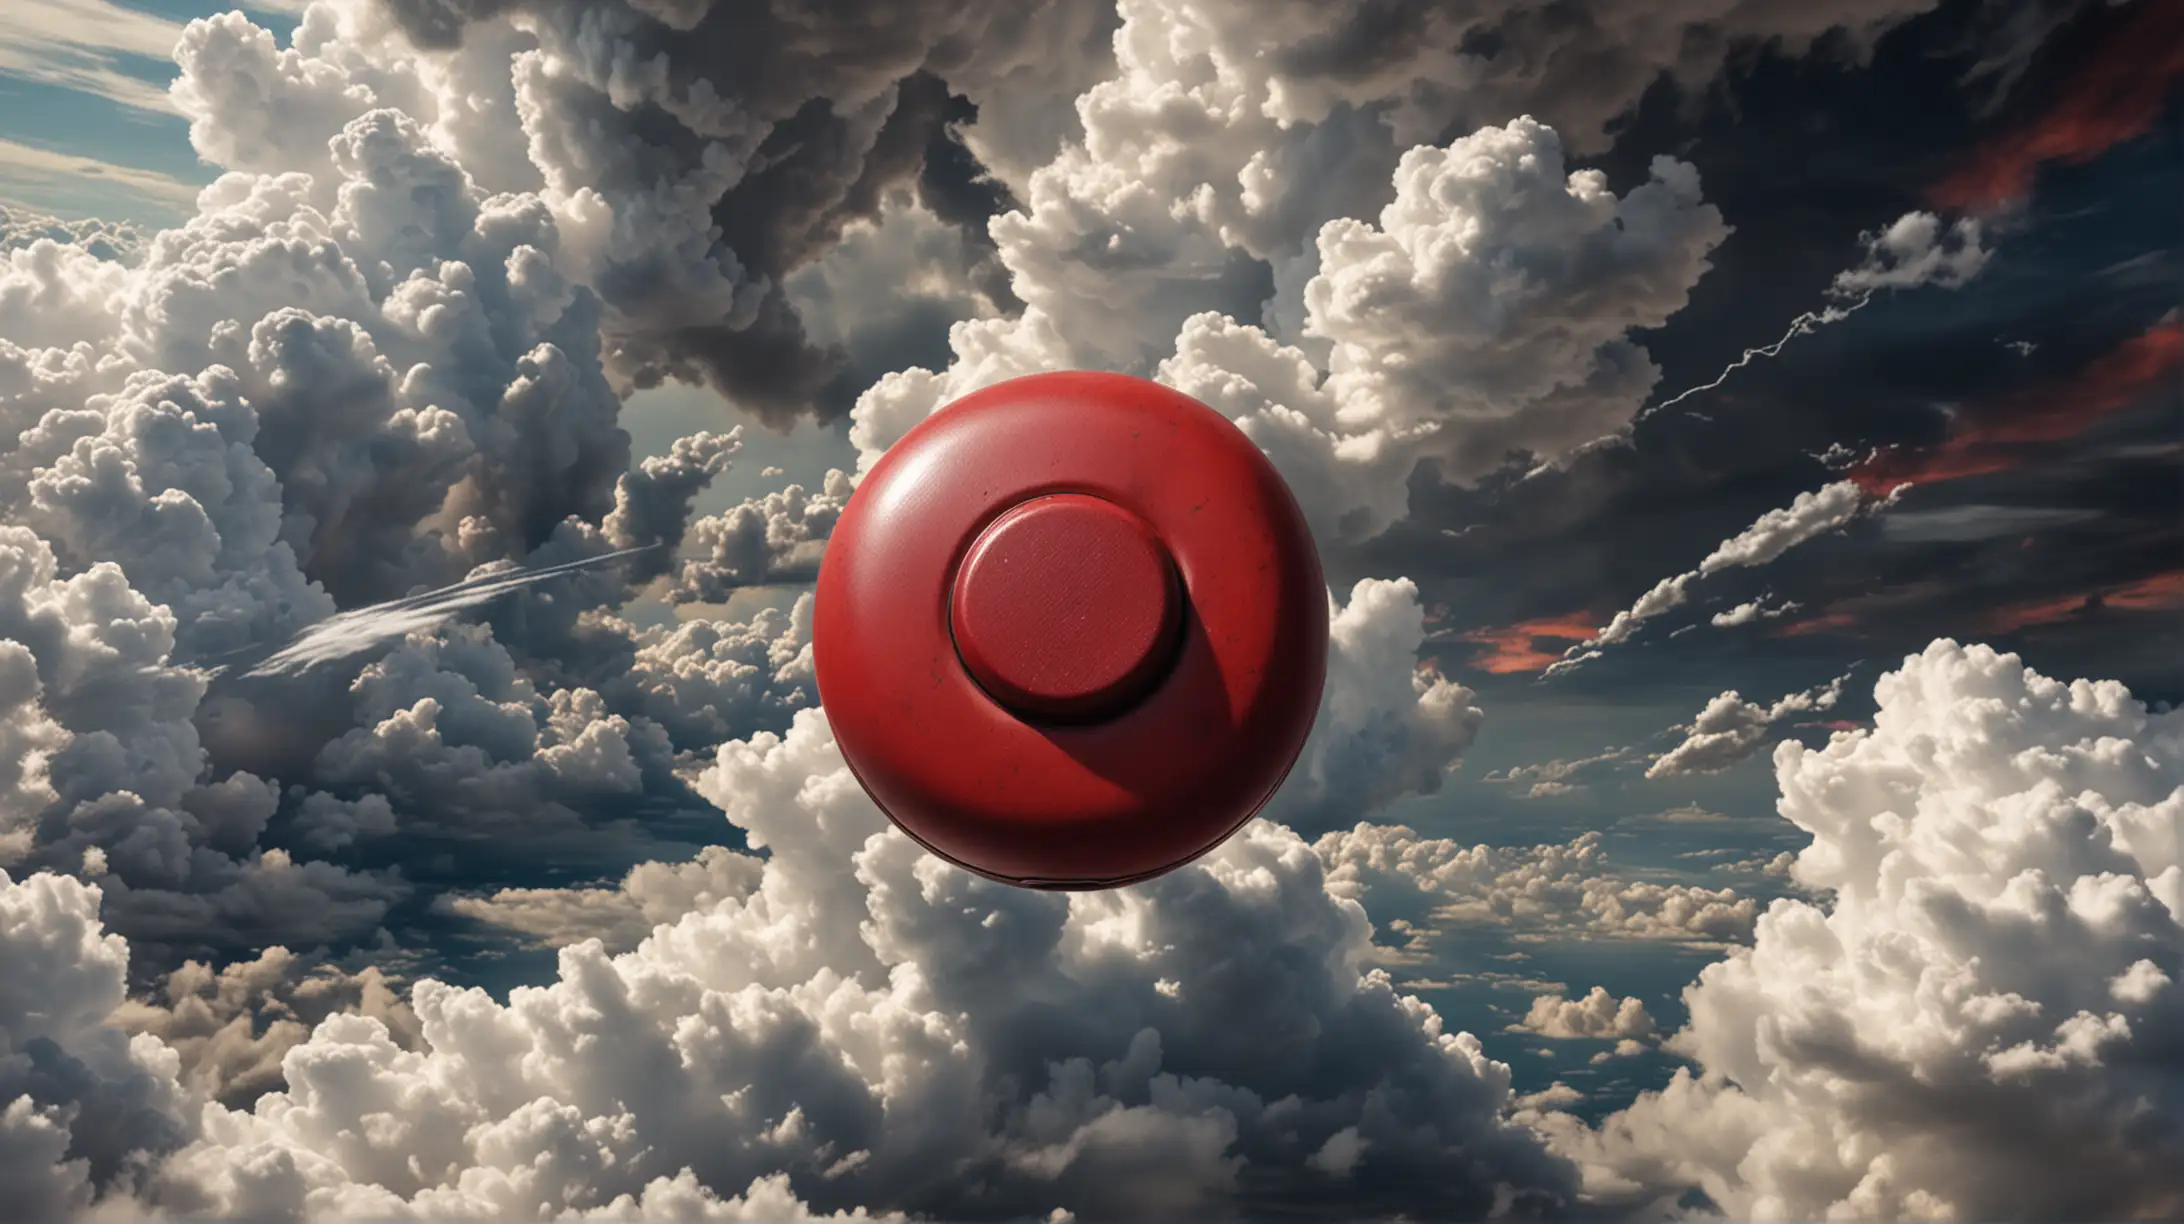 Hyper Realistic Red Button on Roman Chair with Heavenly Sky Background